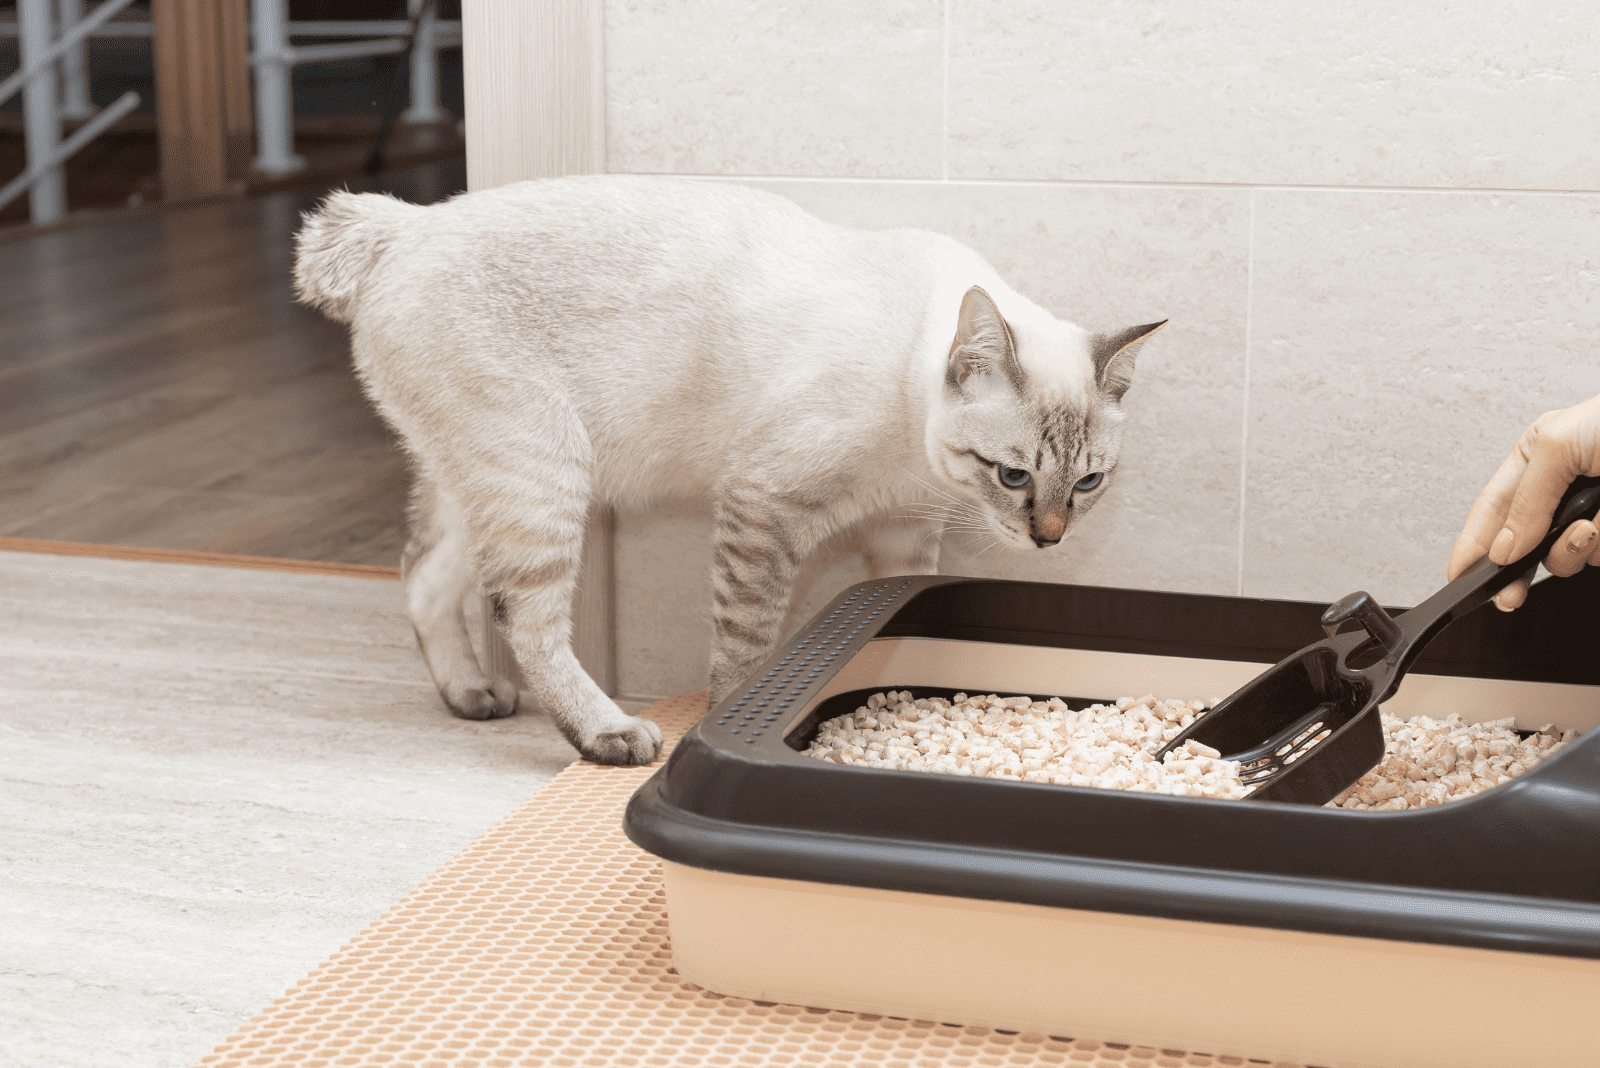 a white cat looks at a person cleaning a litter box